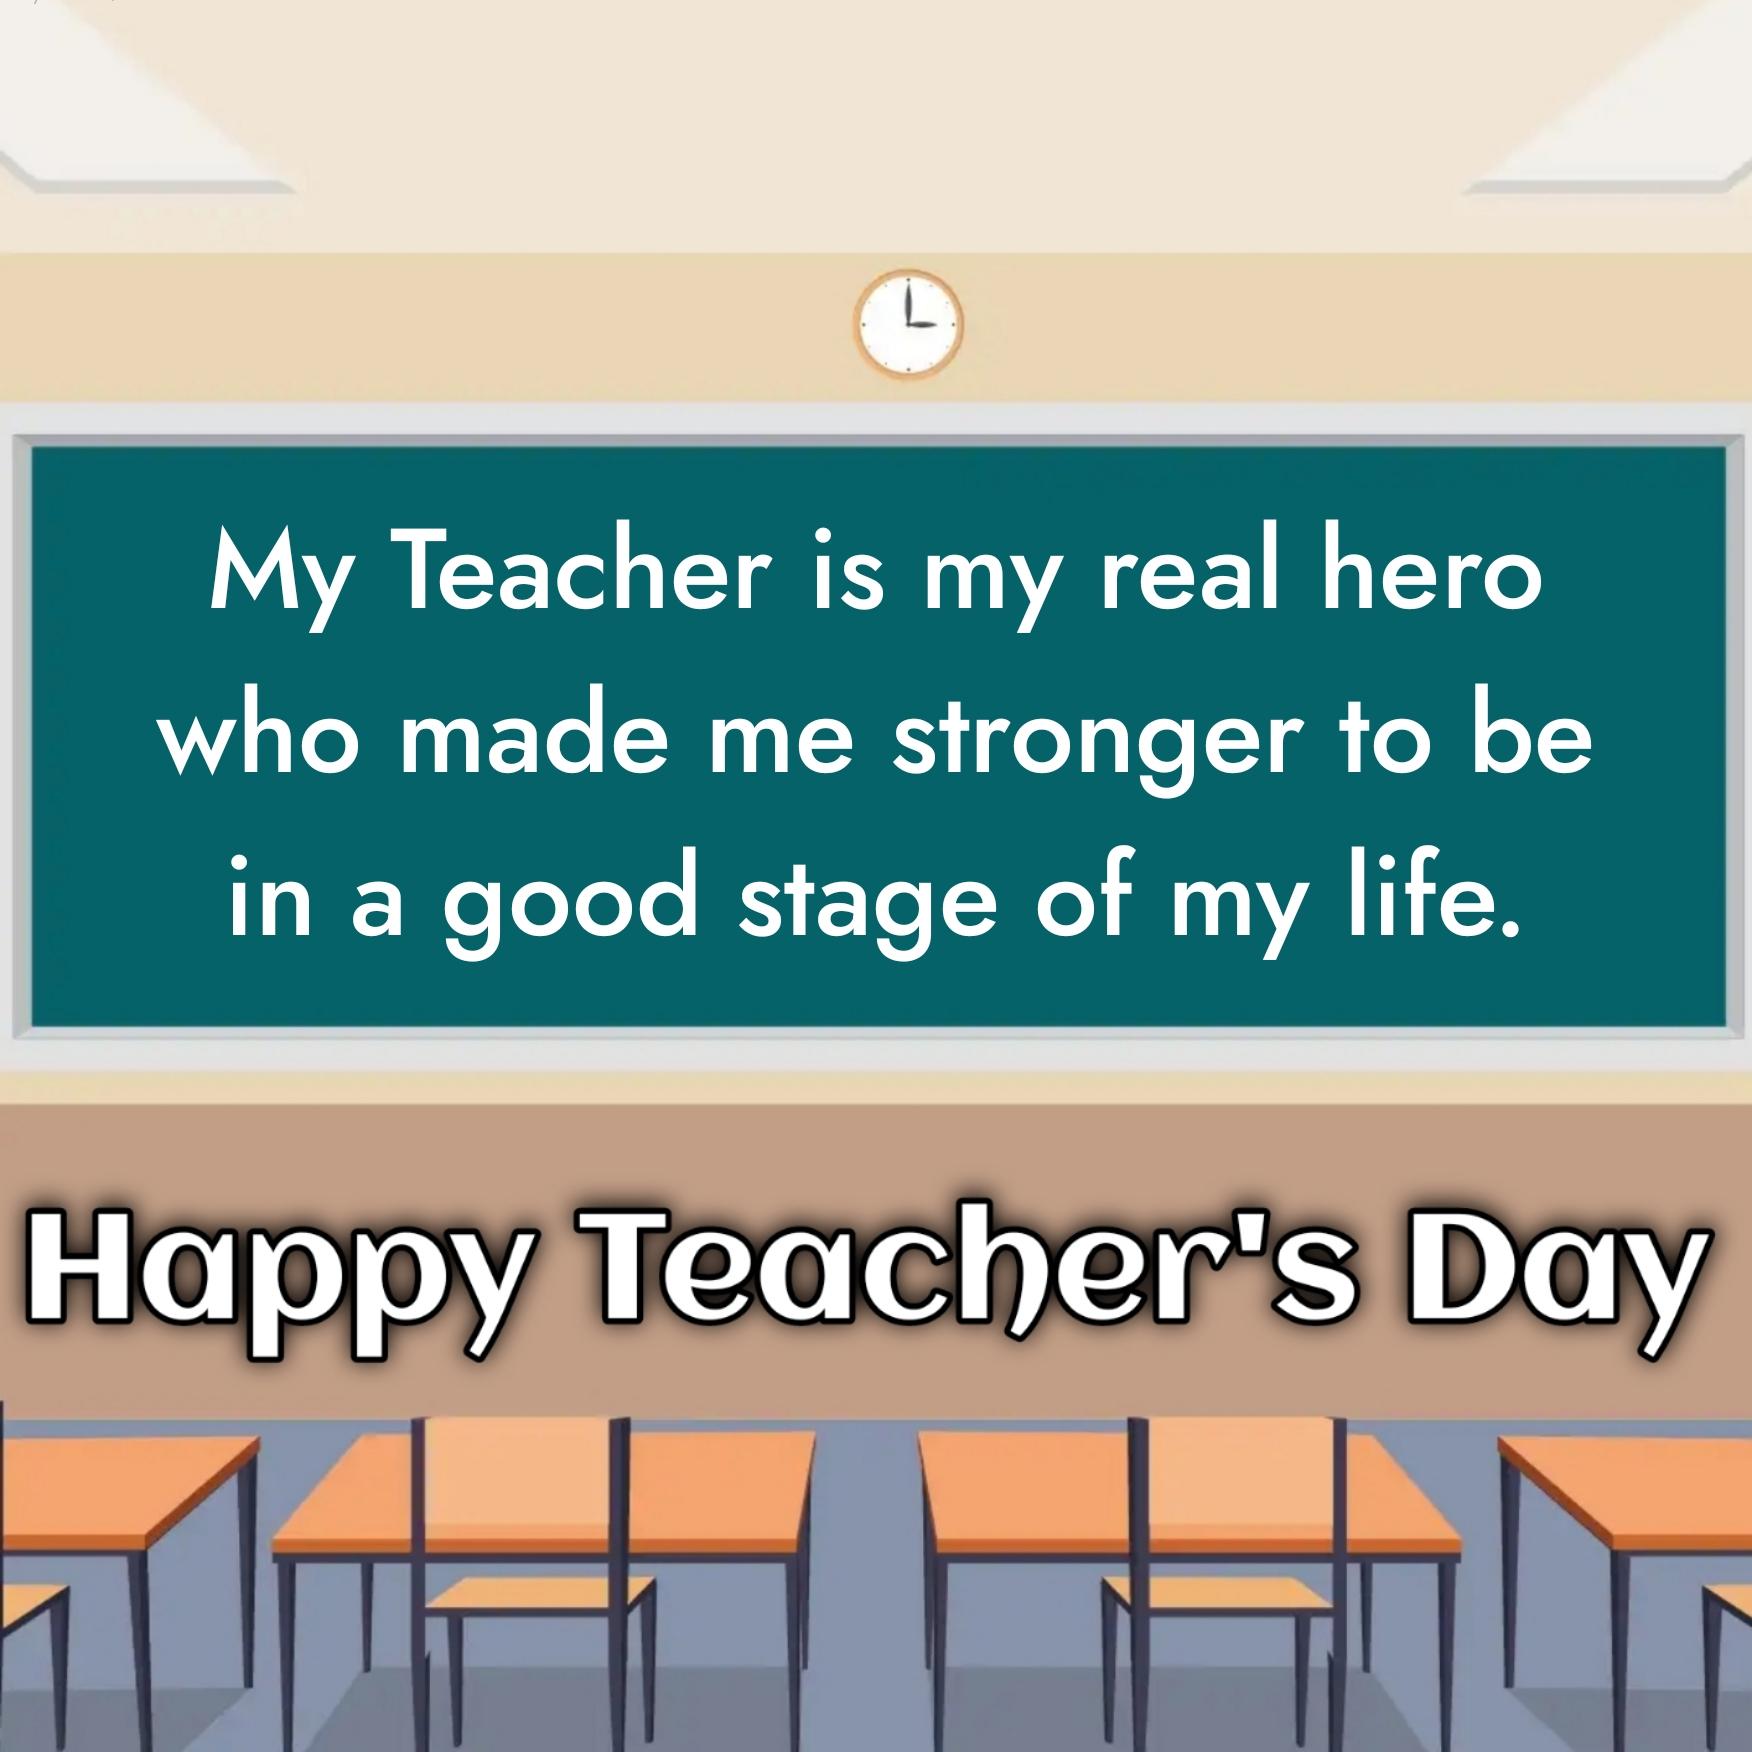 My Teacher is my real hero who made me stronger